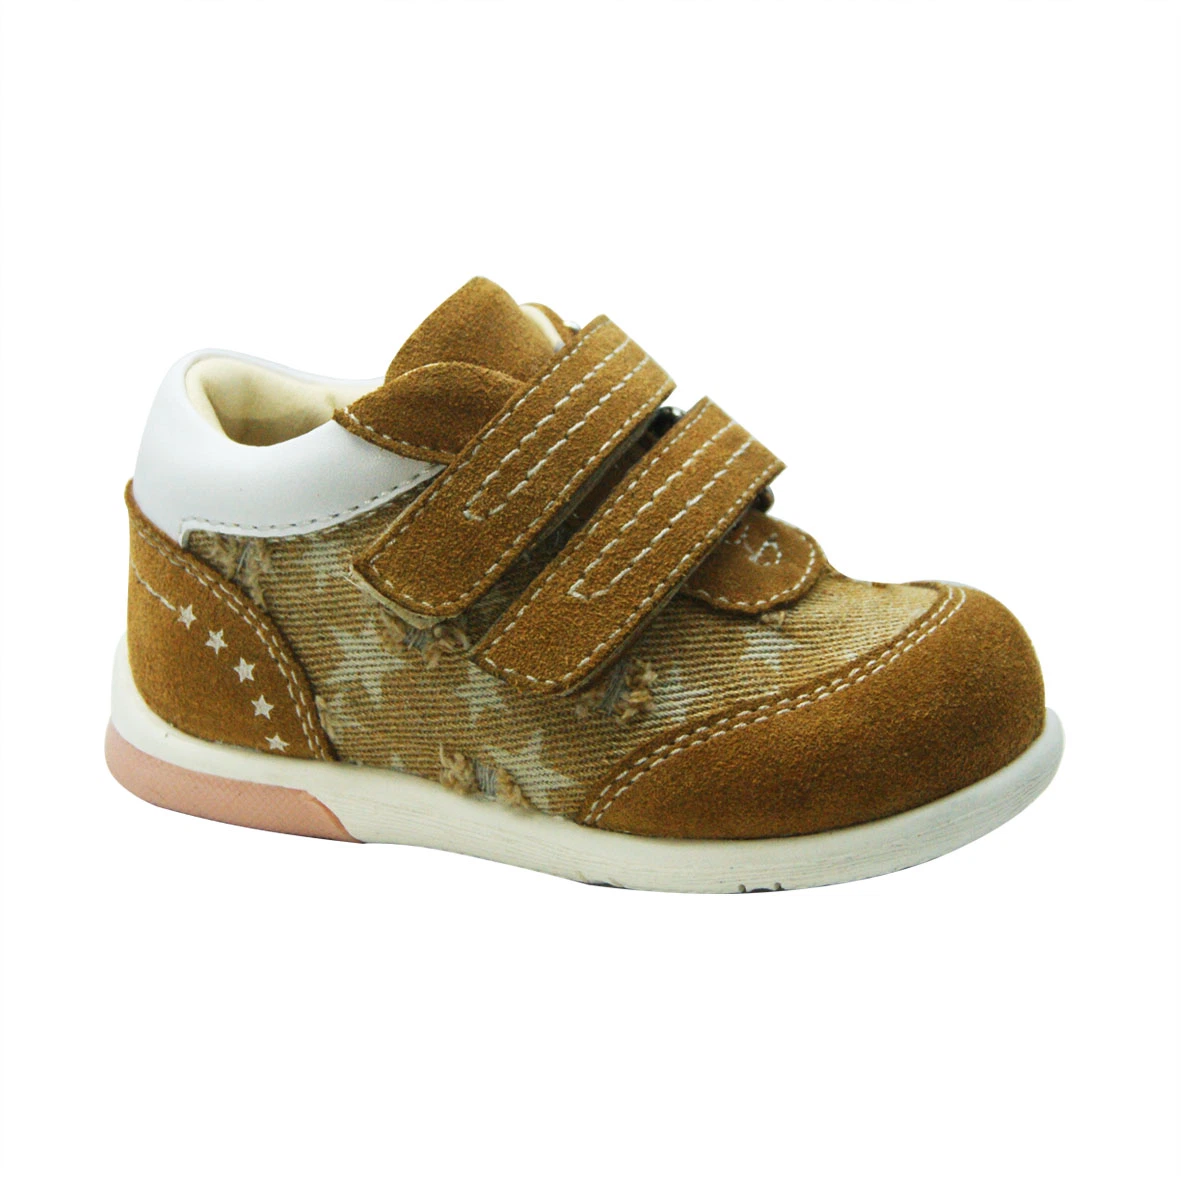 Baby Soft Leather Stable Walking Shoes with Removable Arch Support Insole